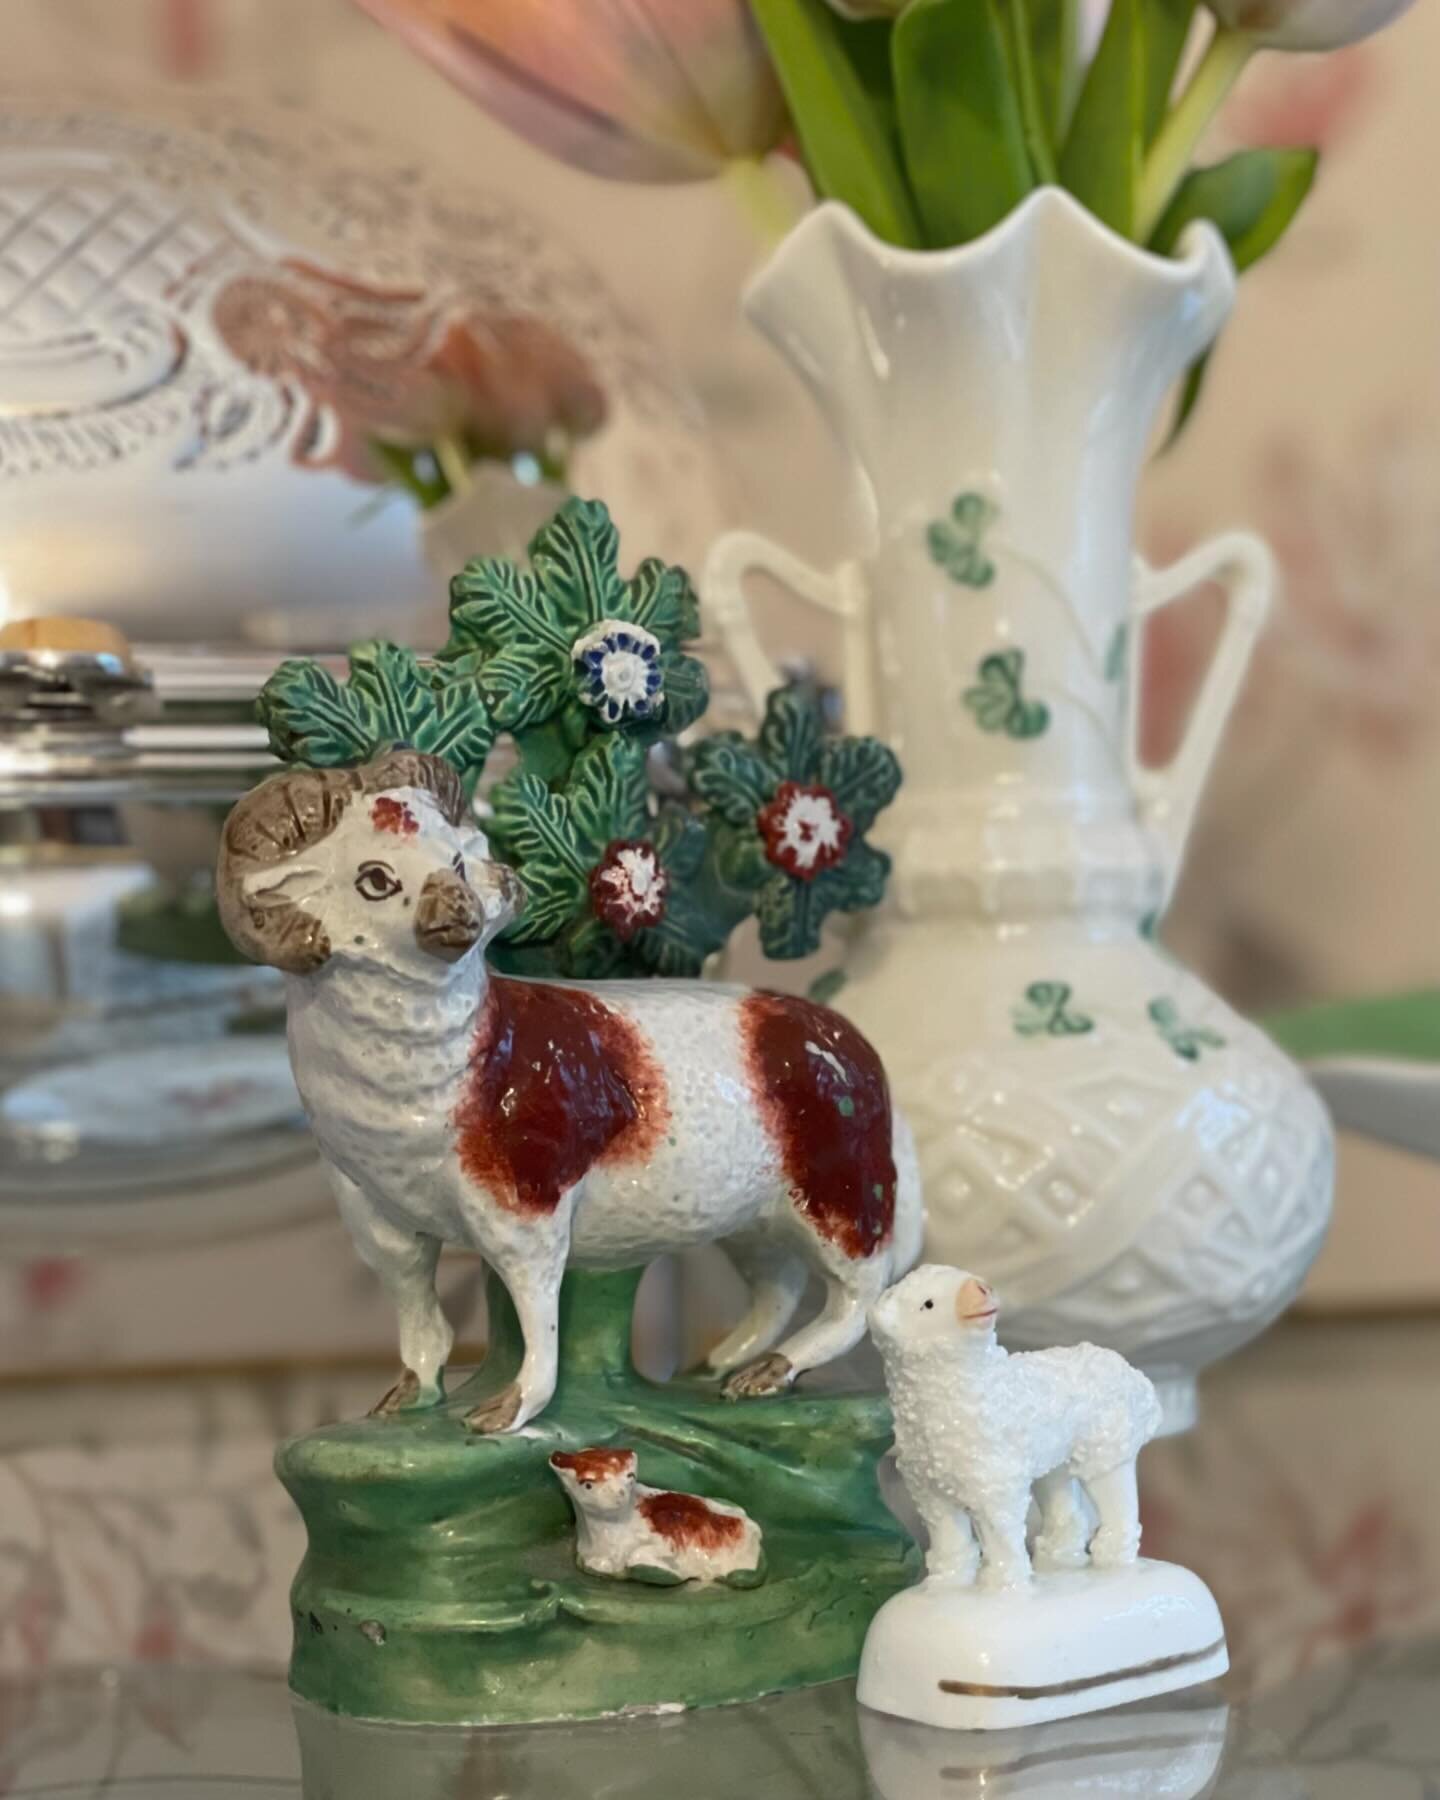 May the rains fall softly upon your fields ☘️ #happysaintpatricksday

*
*
*
*
*

#staffordshire
#timeless
#interiors
#interiordesign
#classic
#antiques
#tablesetting